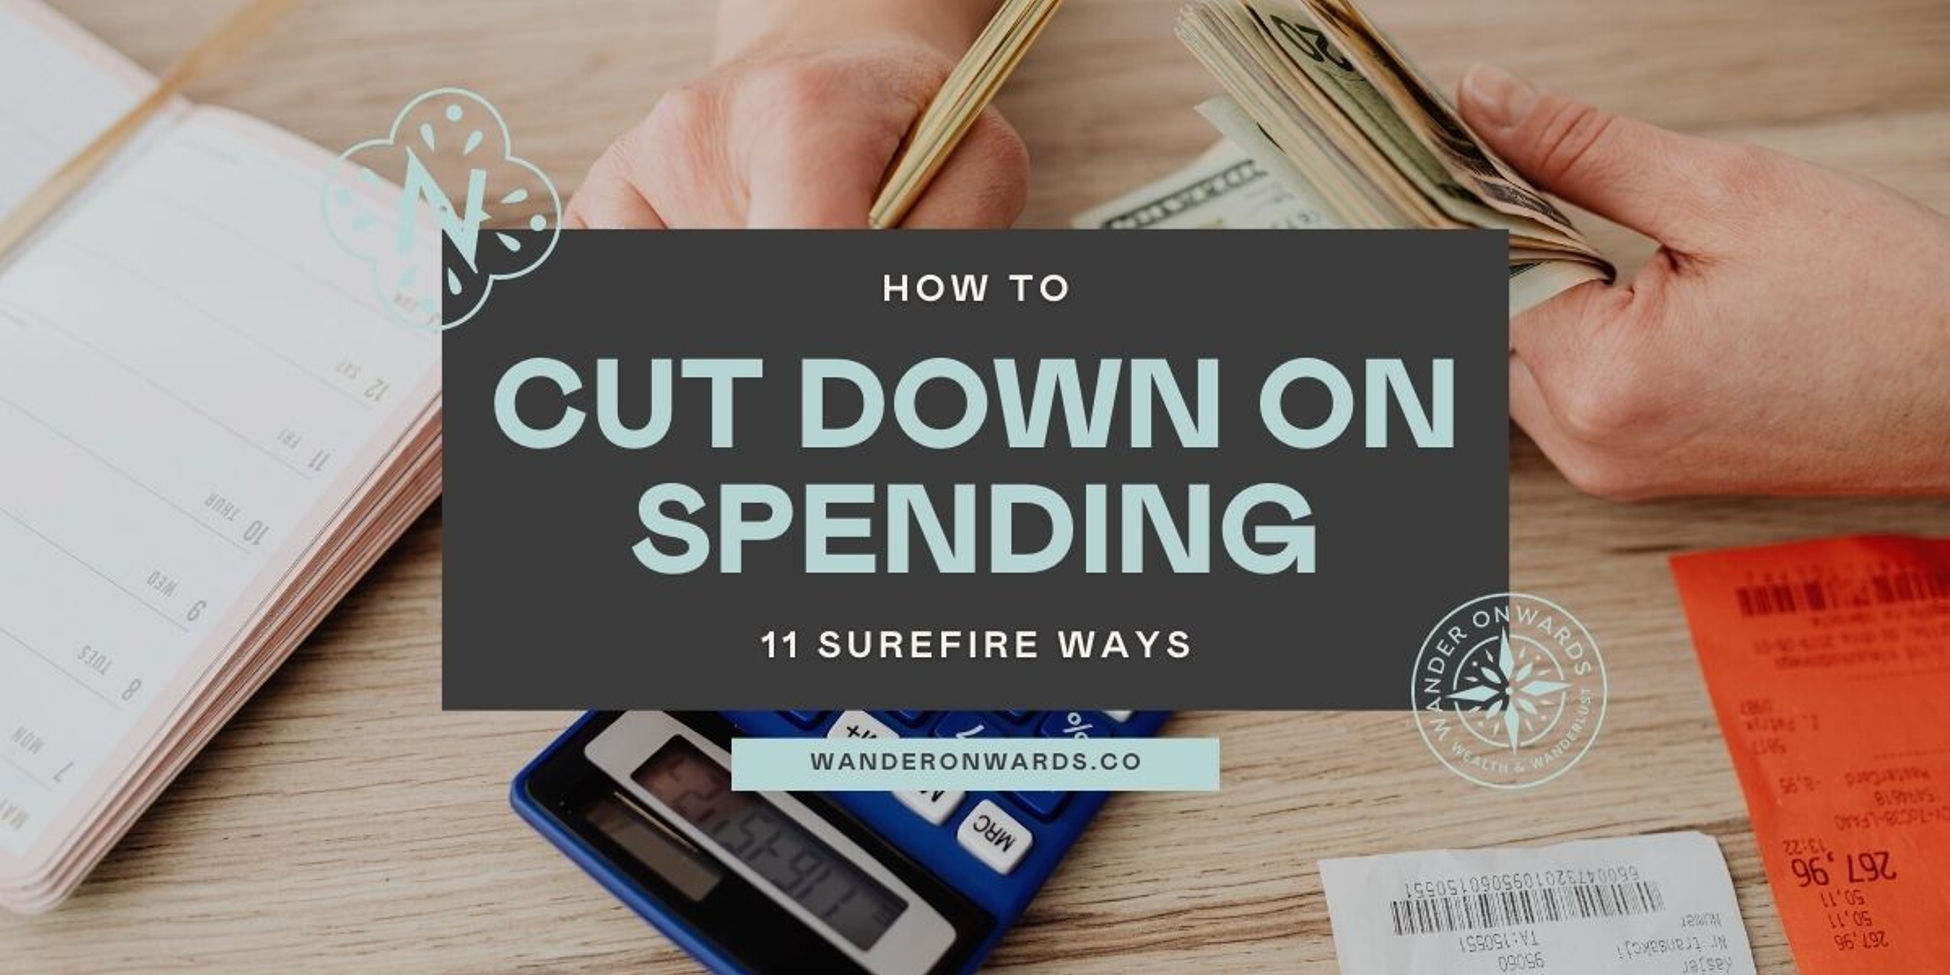 How to Cut Down on Spending: 11 Surefire Ways